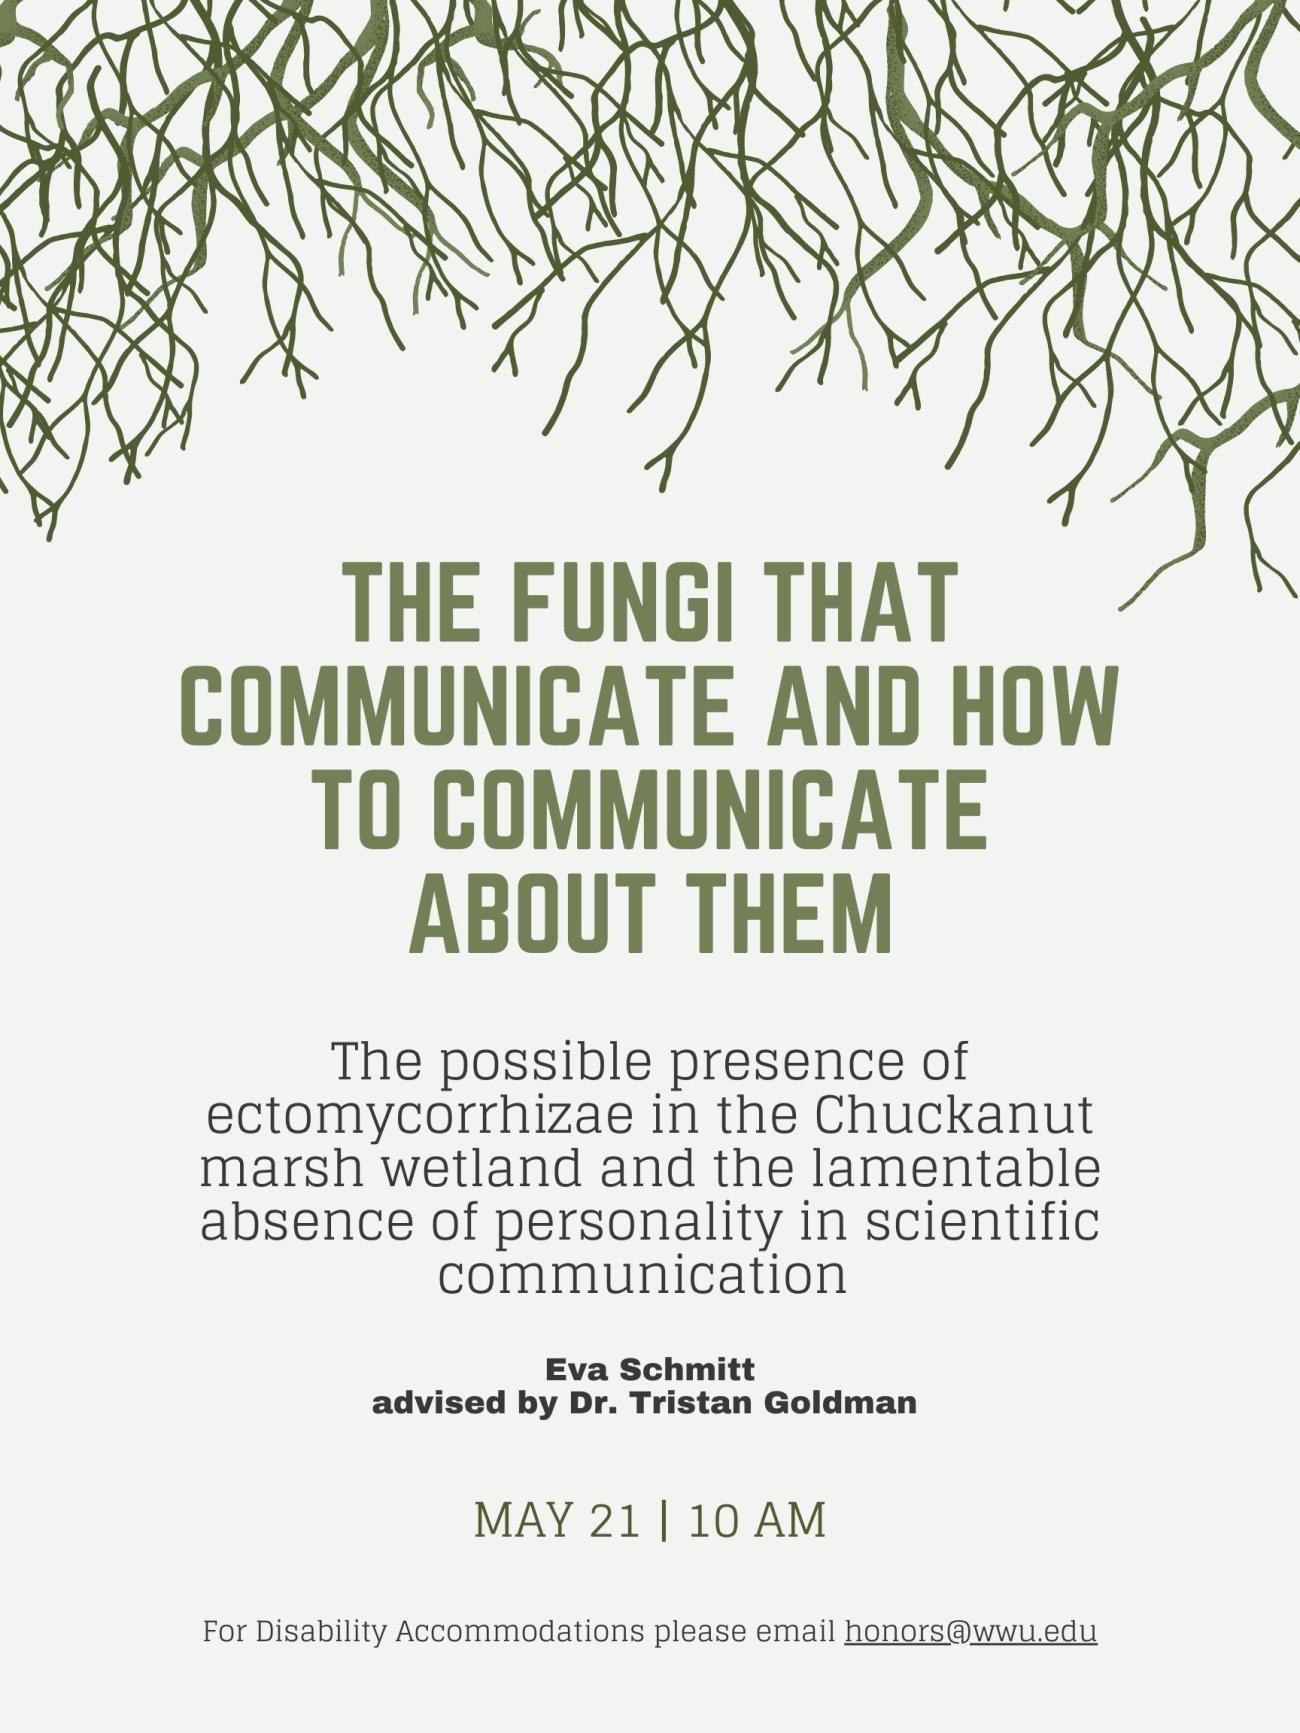 Light green poster with dark roots coming down from the top. Text reads, "The Fungi that Communicate and How to Communicate About Them. The possible presence of ectomycorrhizae in the Chuckanut marsh wetland and the lamentable absence of personality in scientific communication. Eva Schmitt, advised by Dr. Tristan Goldman. May 21st 10 AM. For disability accommodations please email honors@wwu.edu". 